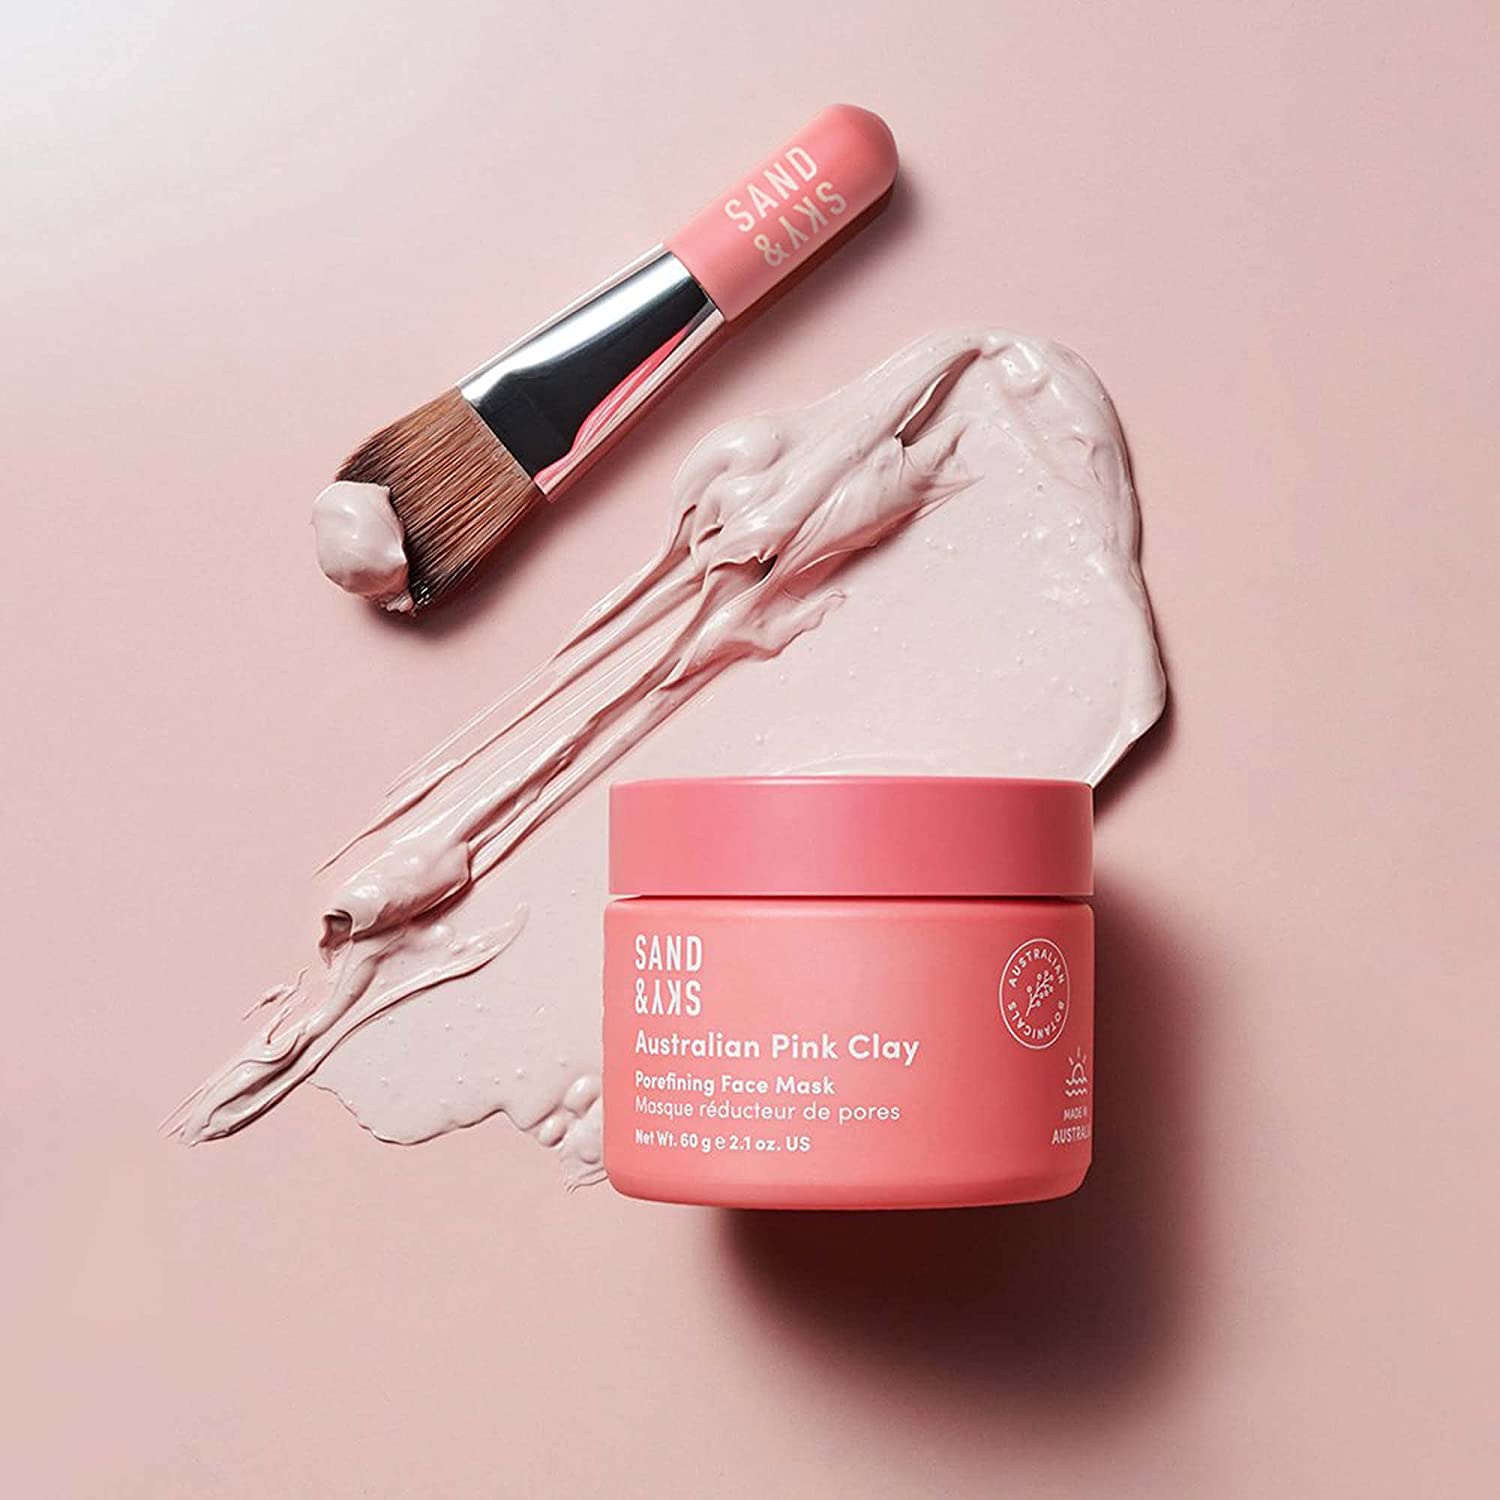 Buy Sand & Sky Australian Pink Clay Porefining Face Mask with applicator  Brush, For All Skin Types, 60 gm Online at Low Prices in India - Amazon.in